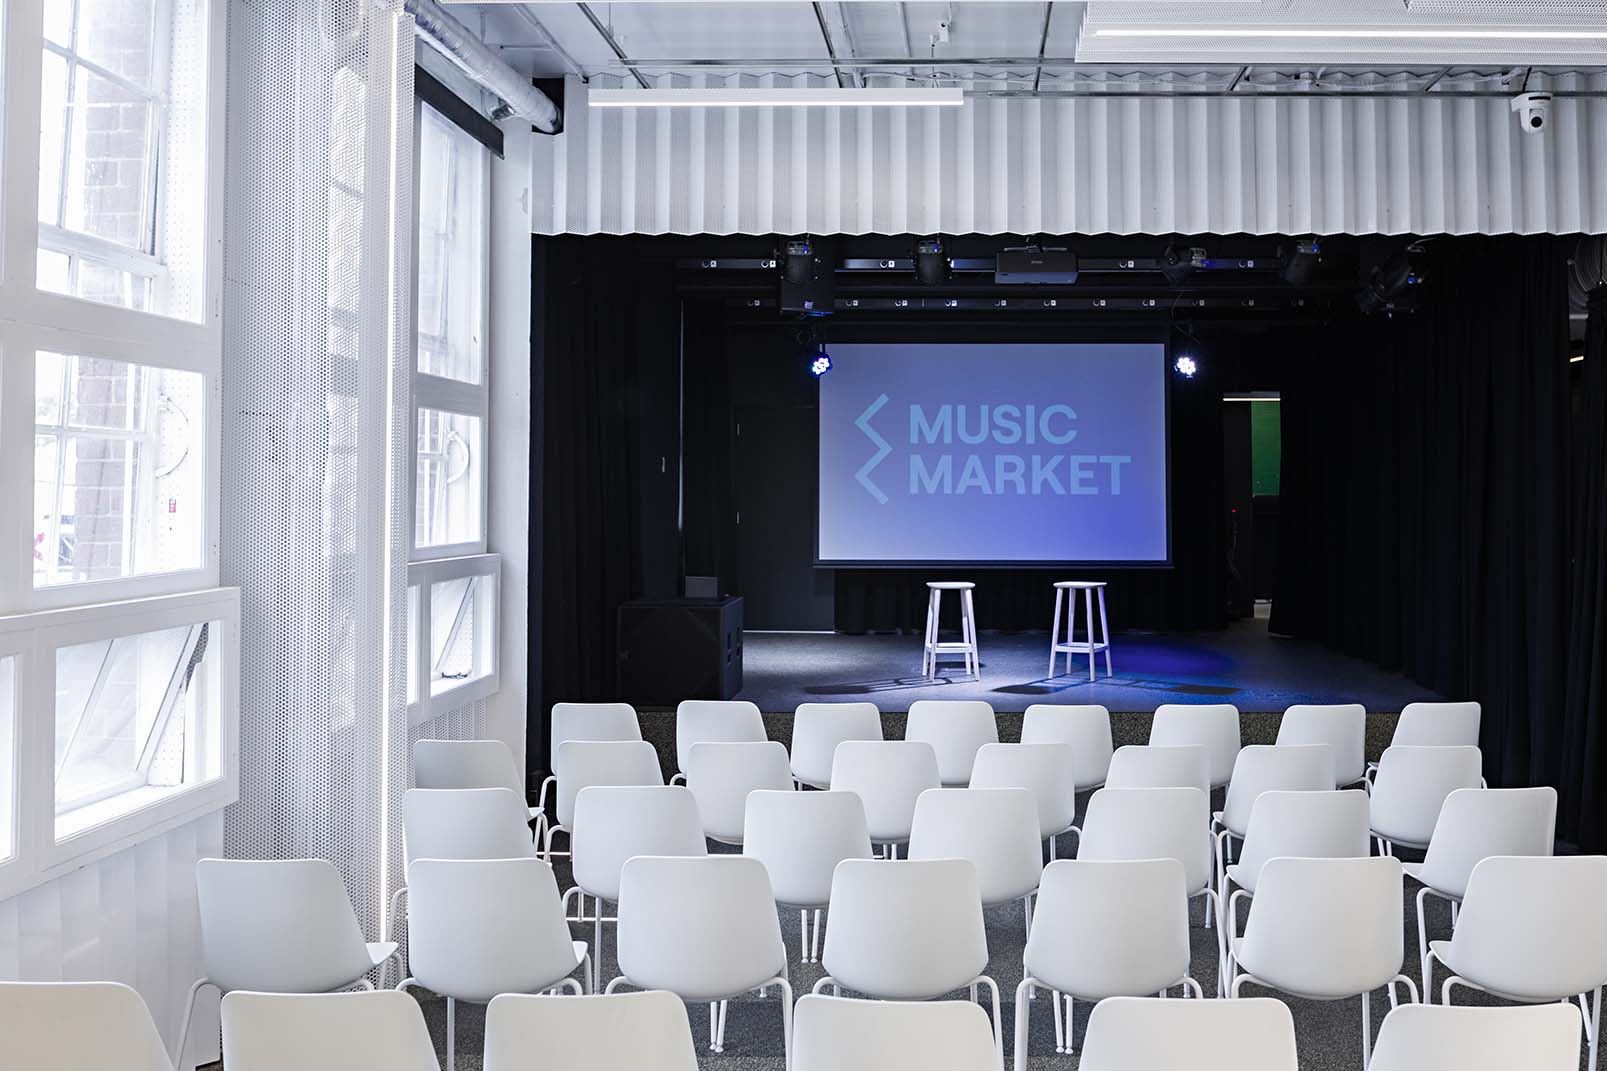 Indoor event space with chairs set up for seated audience facing stage. Stage is set up with two stools and projector screen that says Music Market.